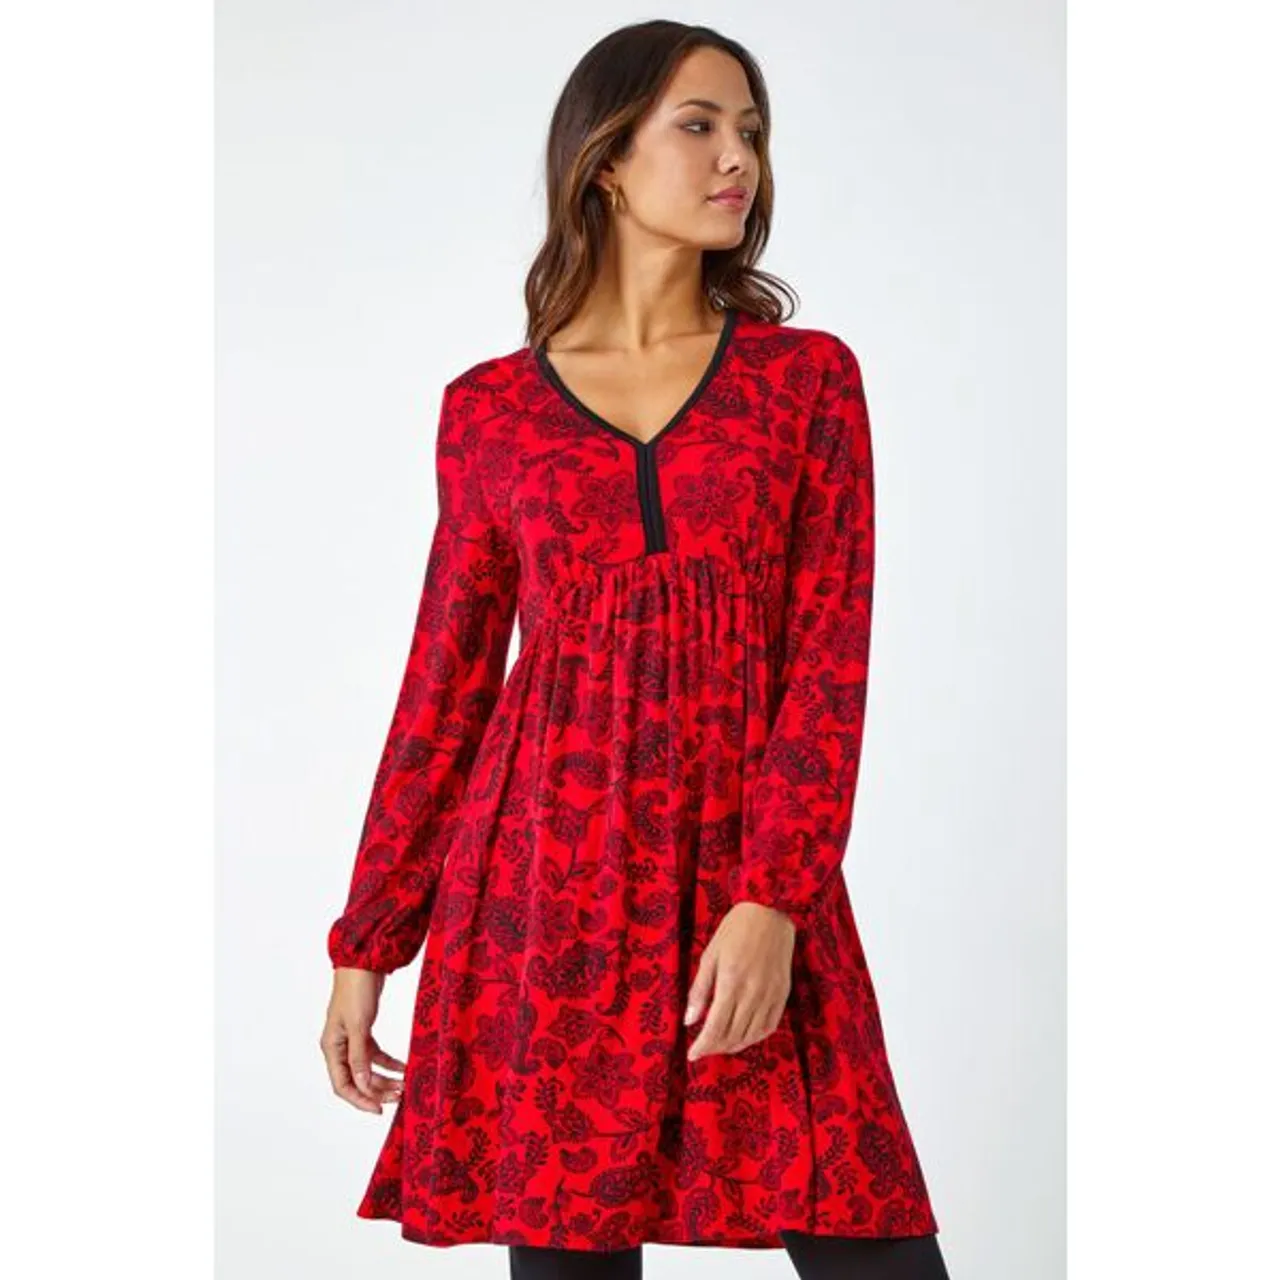 Roman Floral Print Stretch Jersey Dress in Red - Size 20 20 female